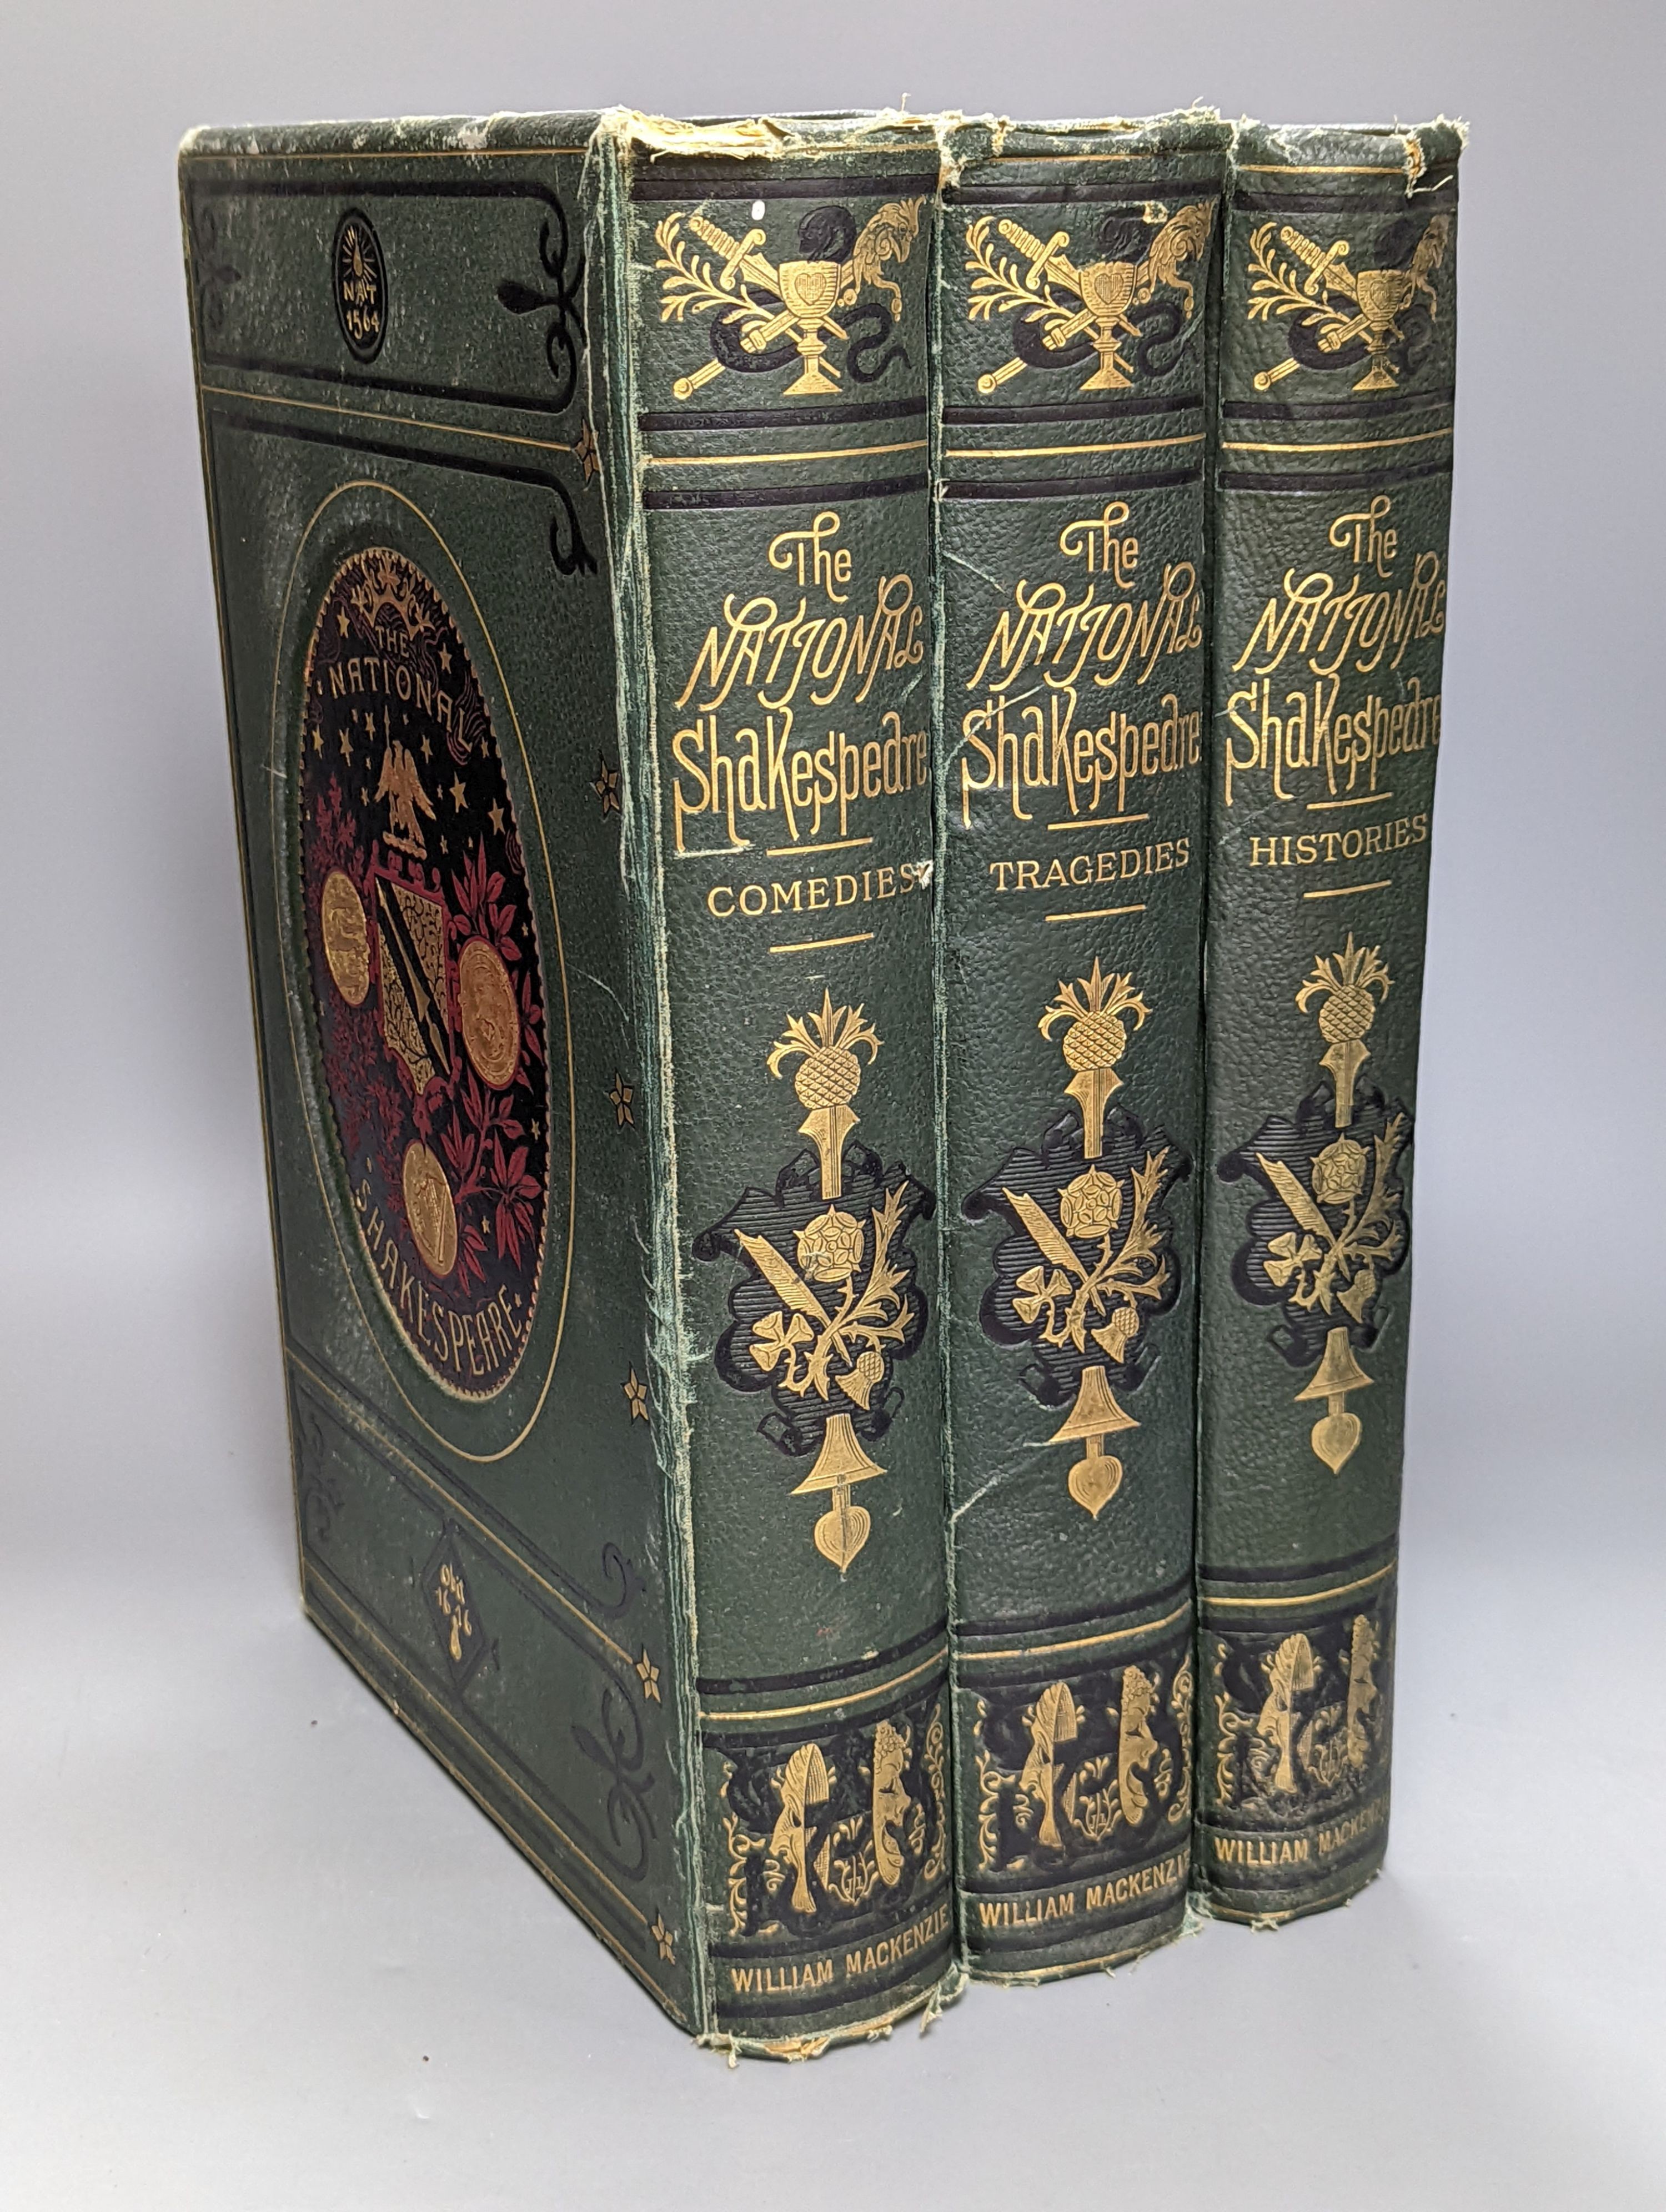 Shakespeare, William - The National Shakespeare: a fac-simile of the text of the first folio of 1623 ... num. plates; publisher's green gilt morocco, coloured pictorial inset on upper boards